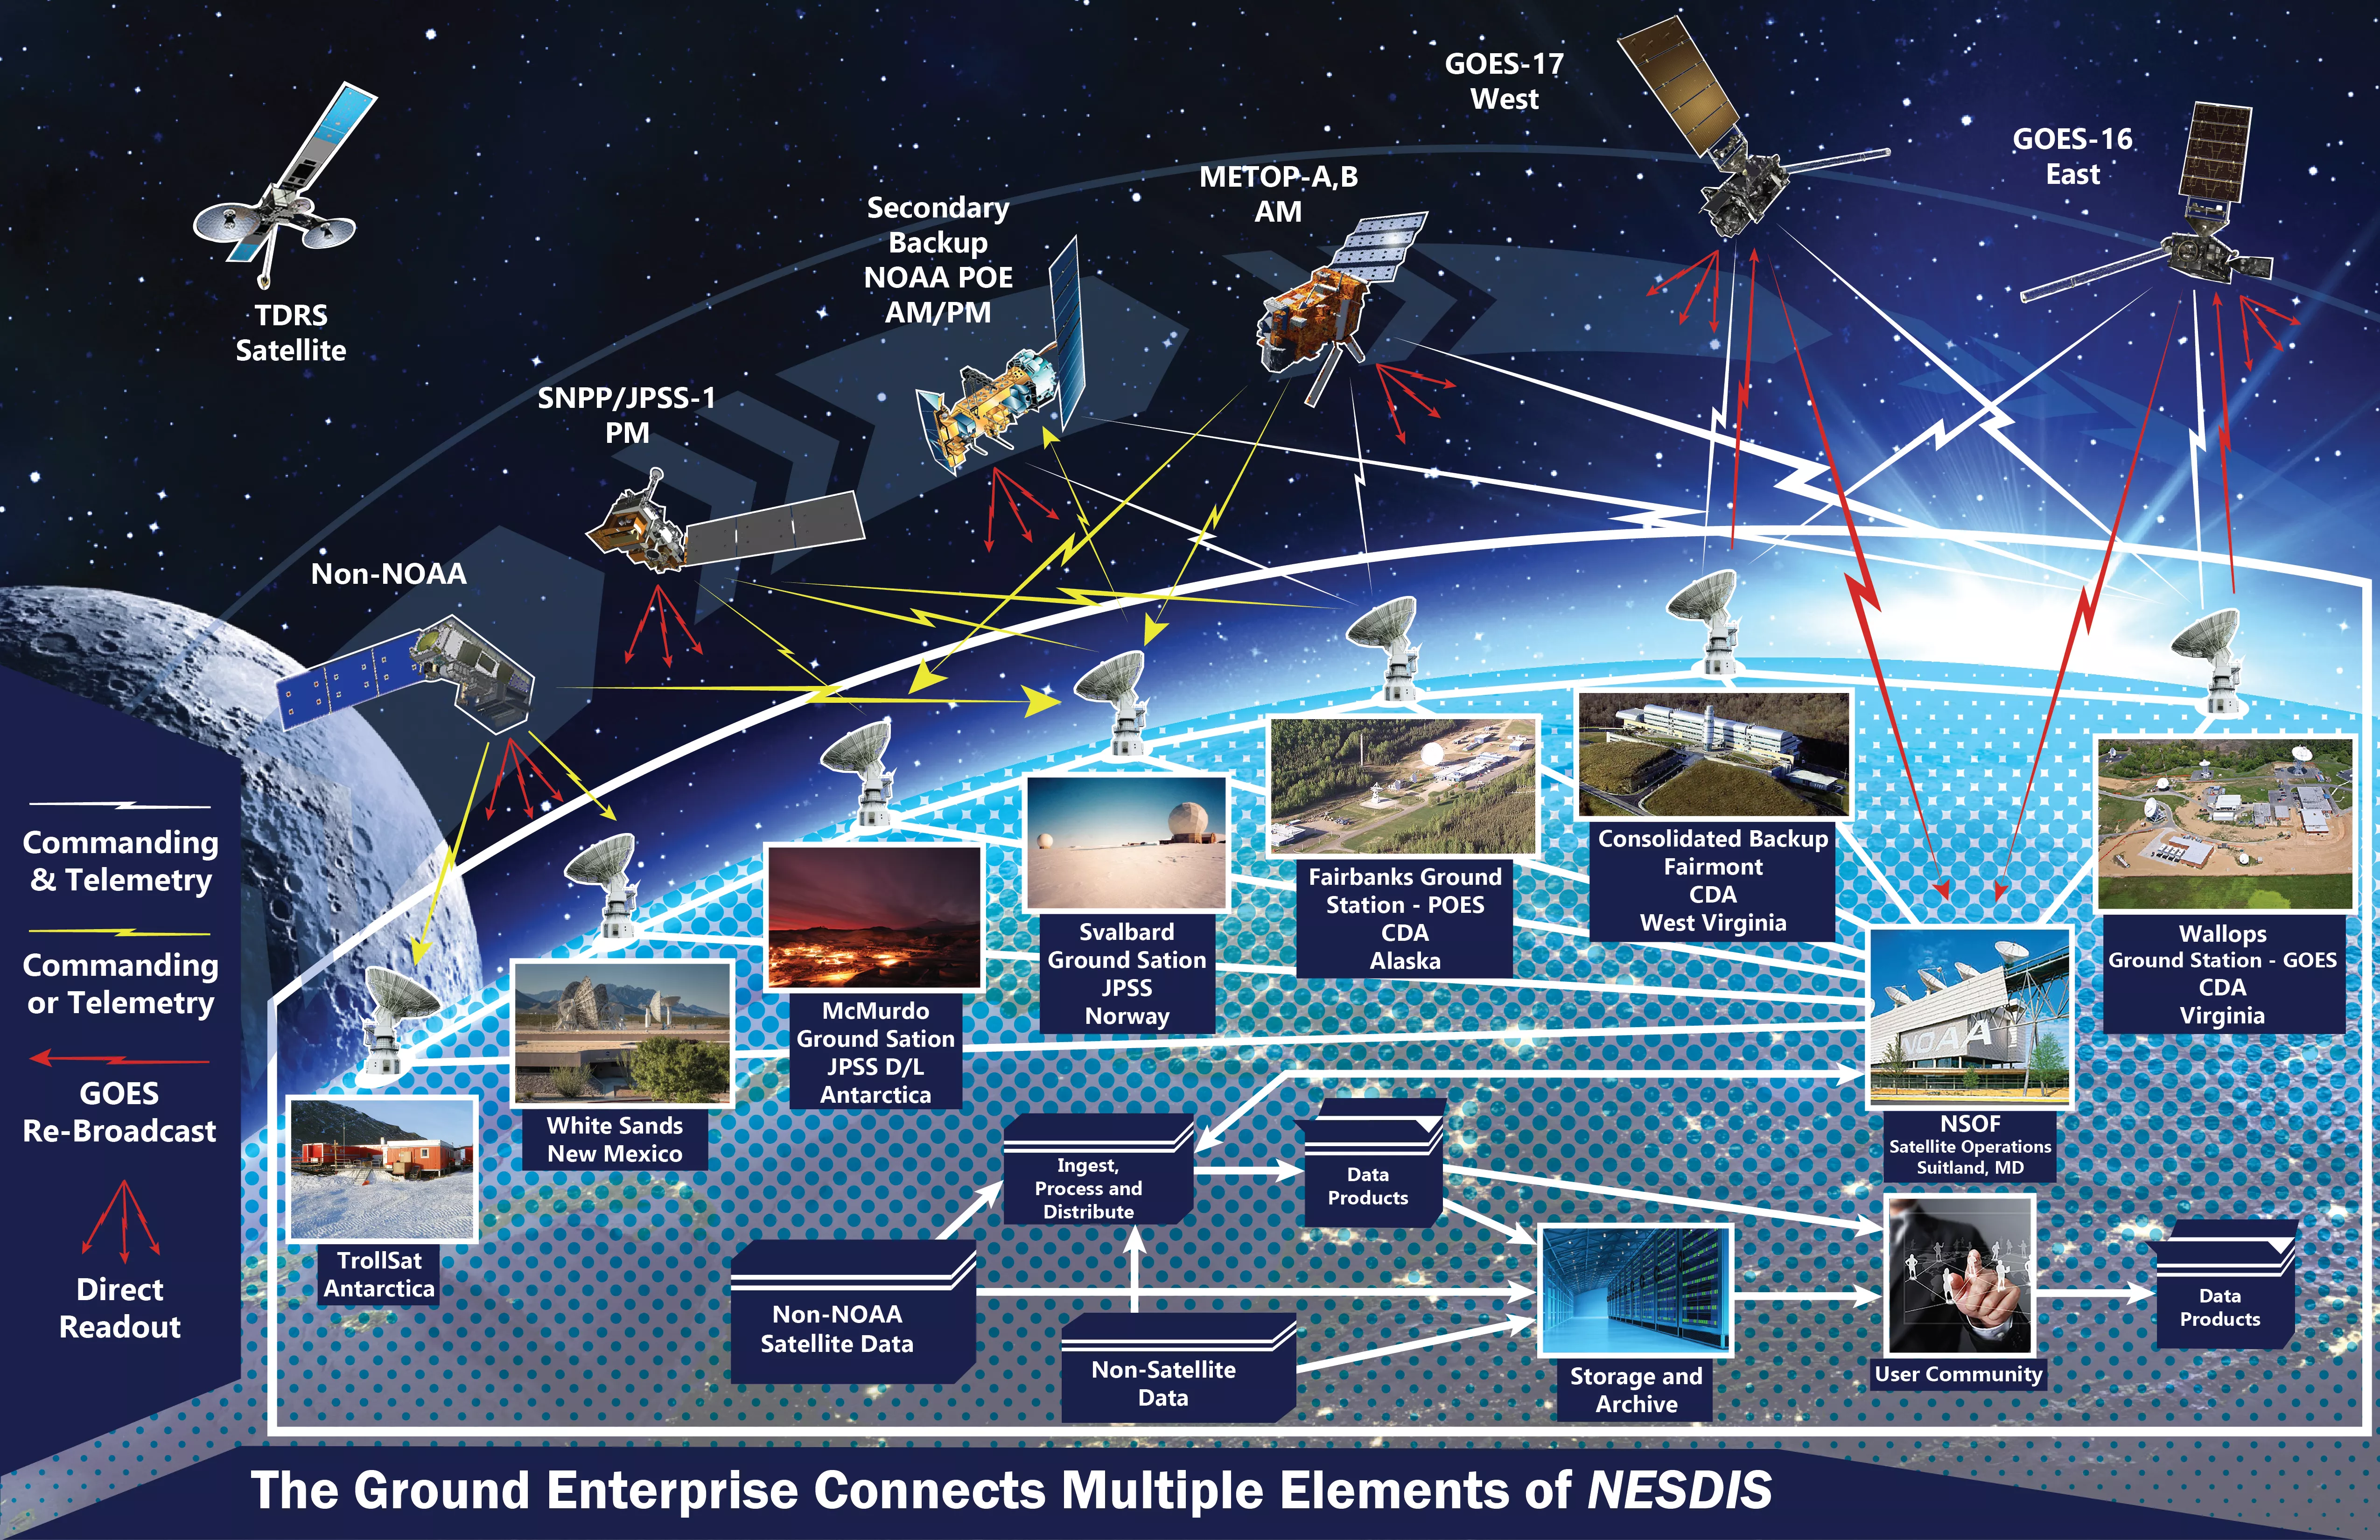 The ground enterprise connects multiple elements of NESDIS.